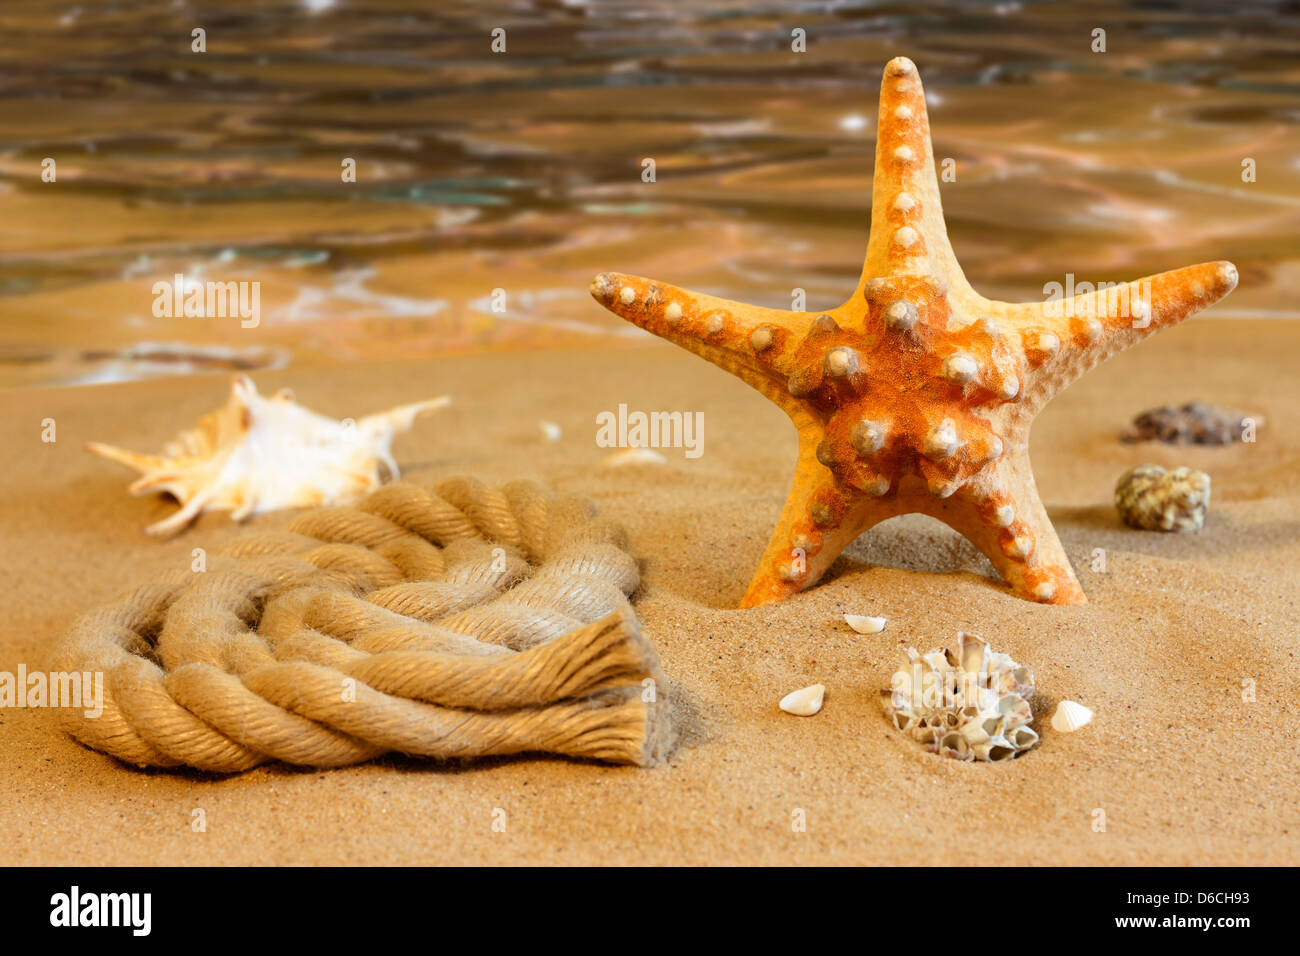 Starfish on the beach on sand with shells background concept Stock Photo